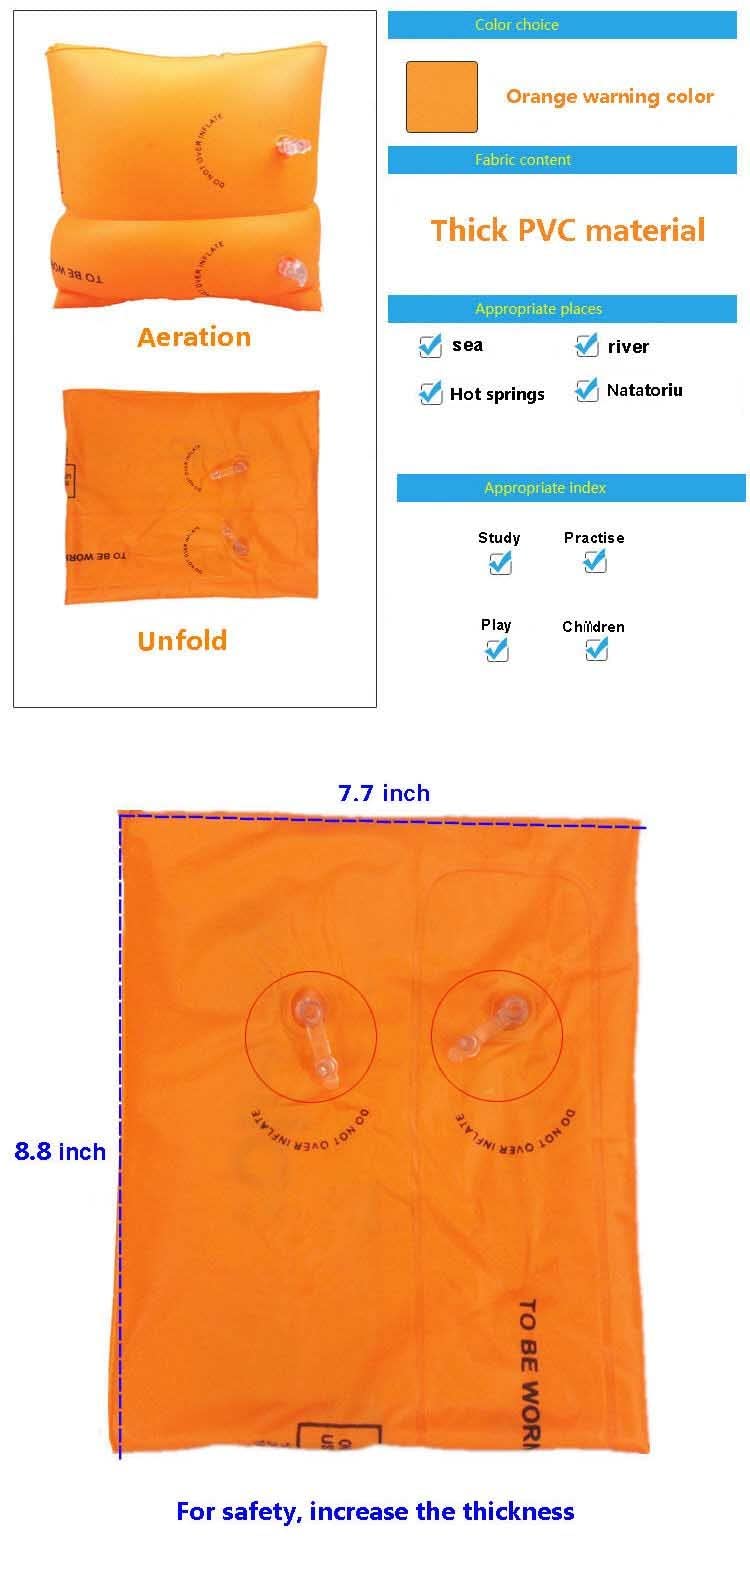 Topsung Floaties Inflatable Swim Arm Bands Rings Floats Tube Armlets for Kids and Adult _Blue + Orange